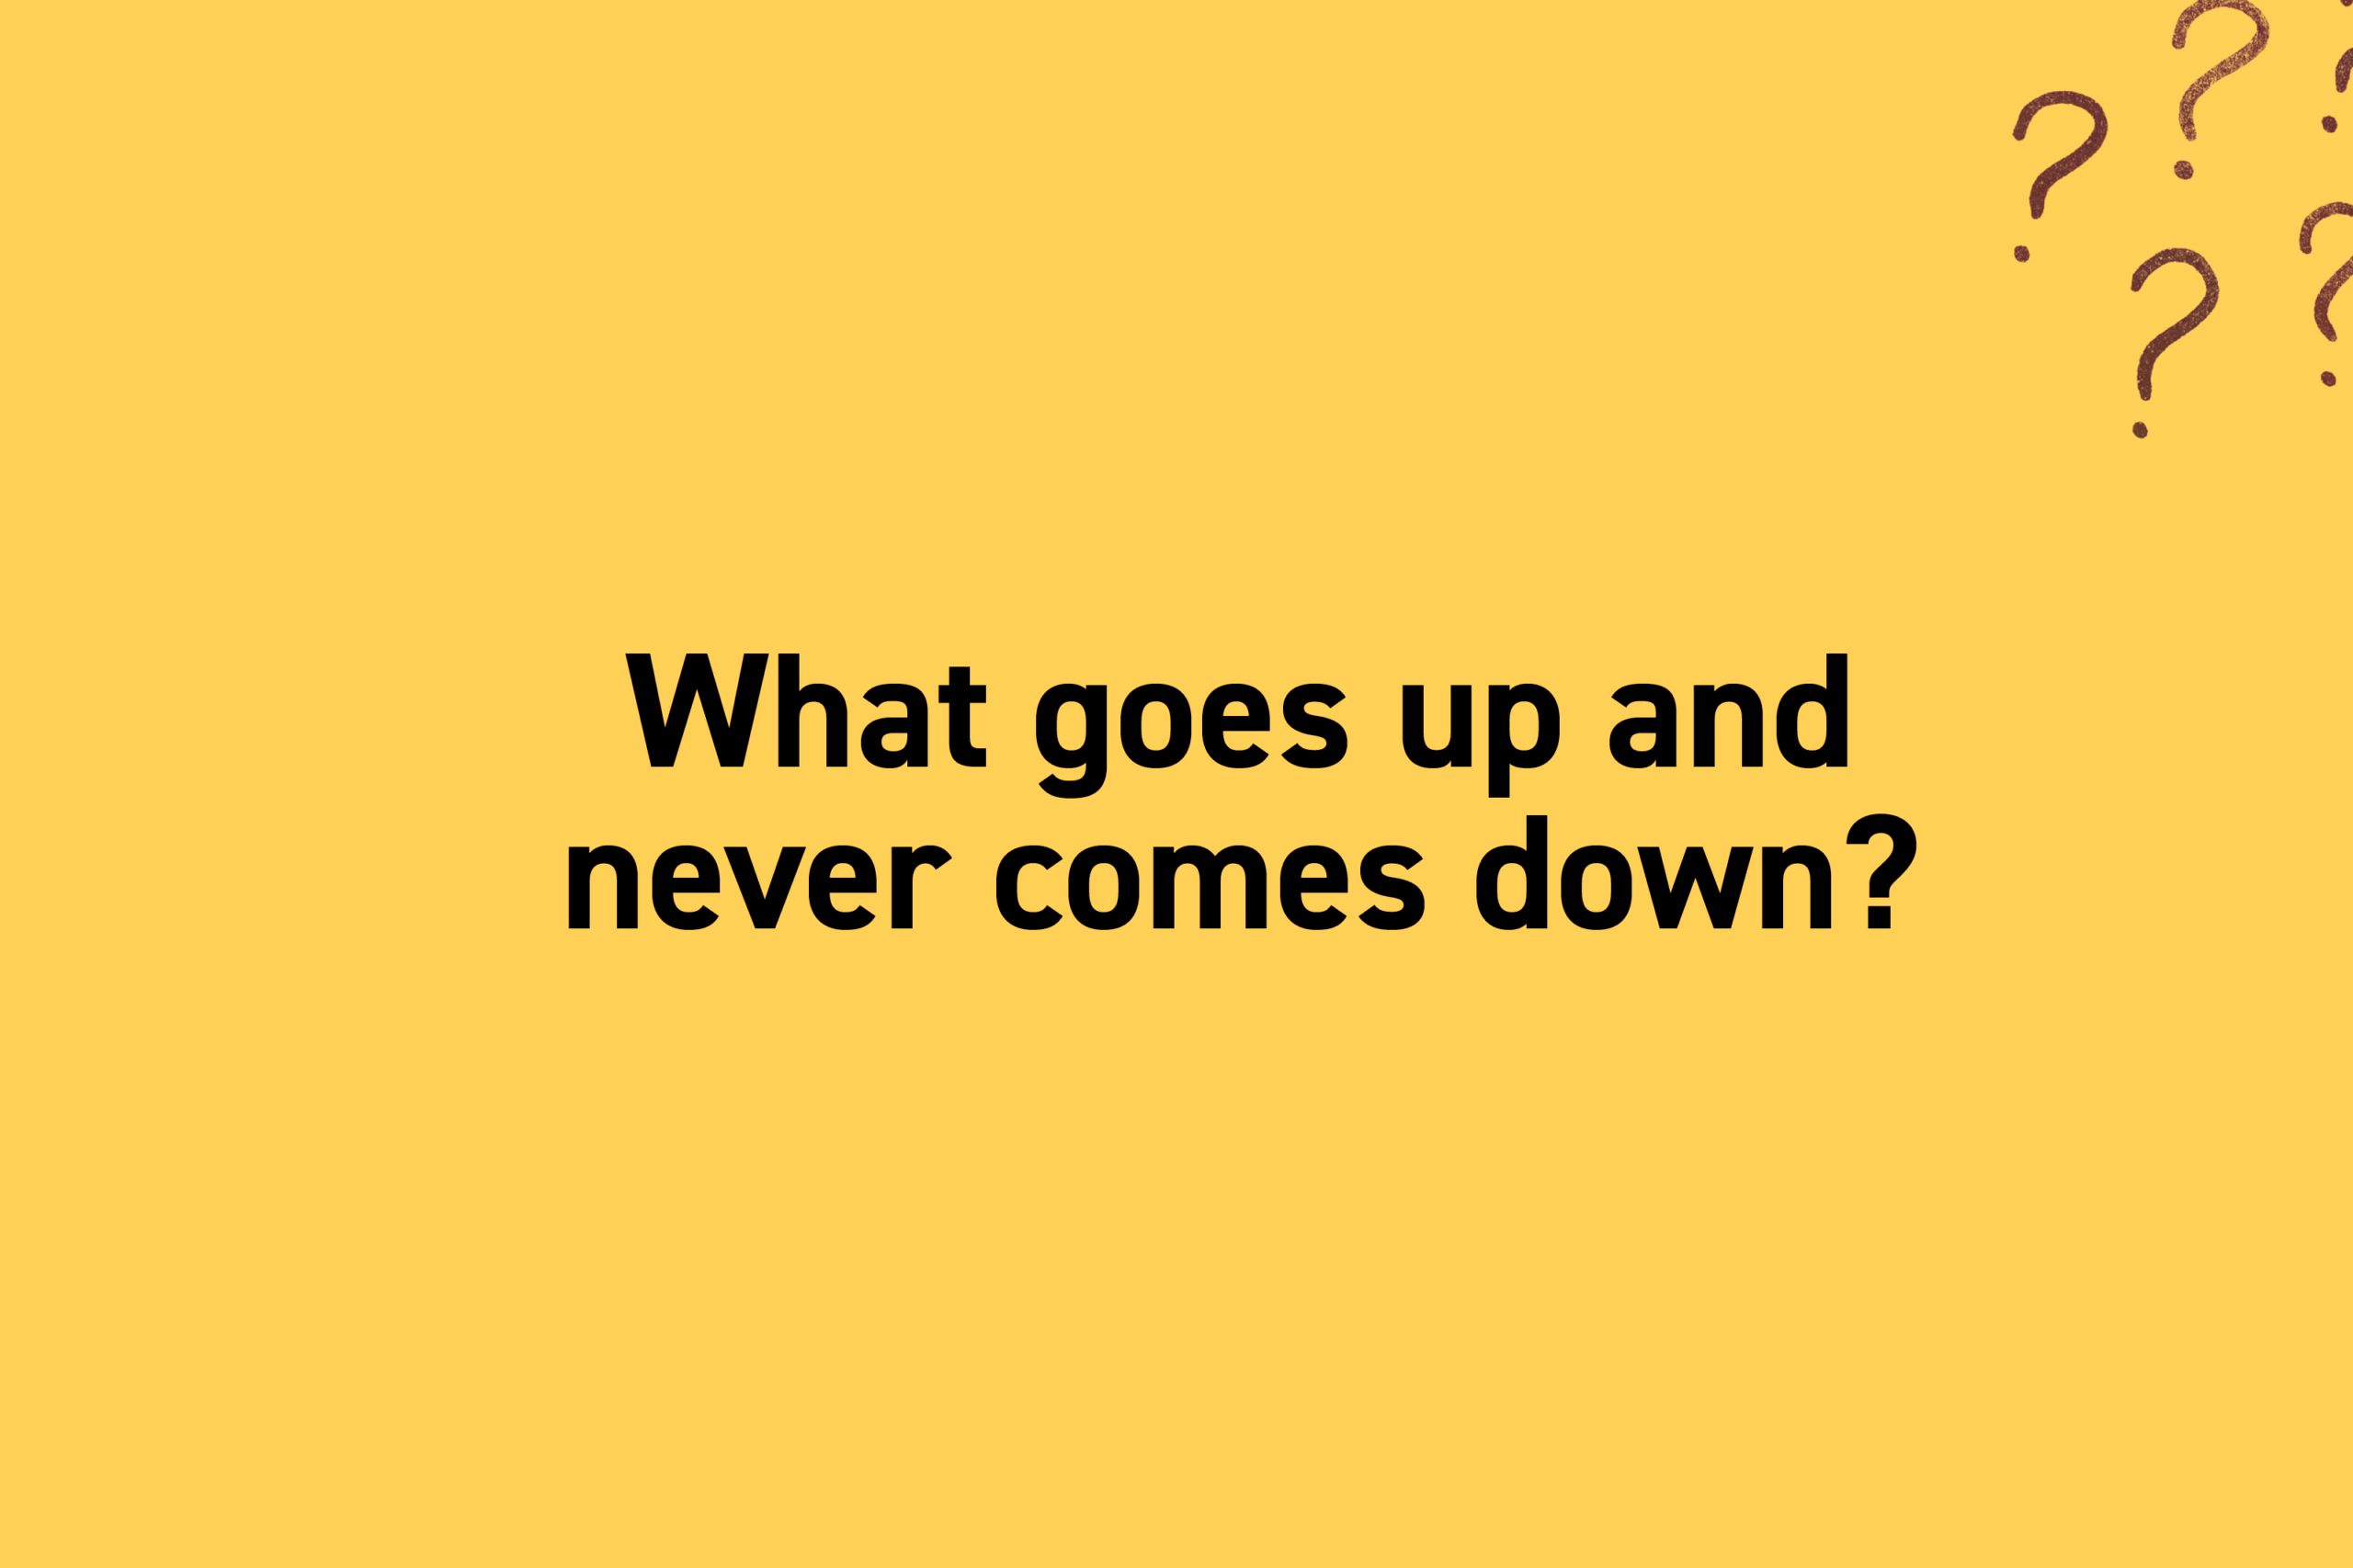 What goes up and never comes down?